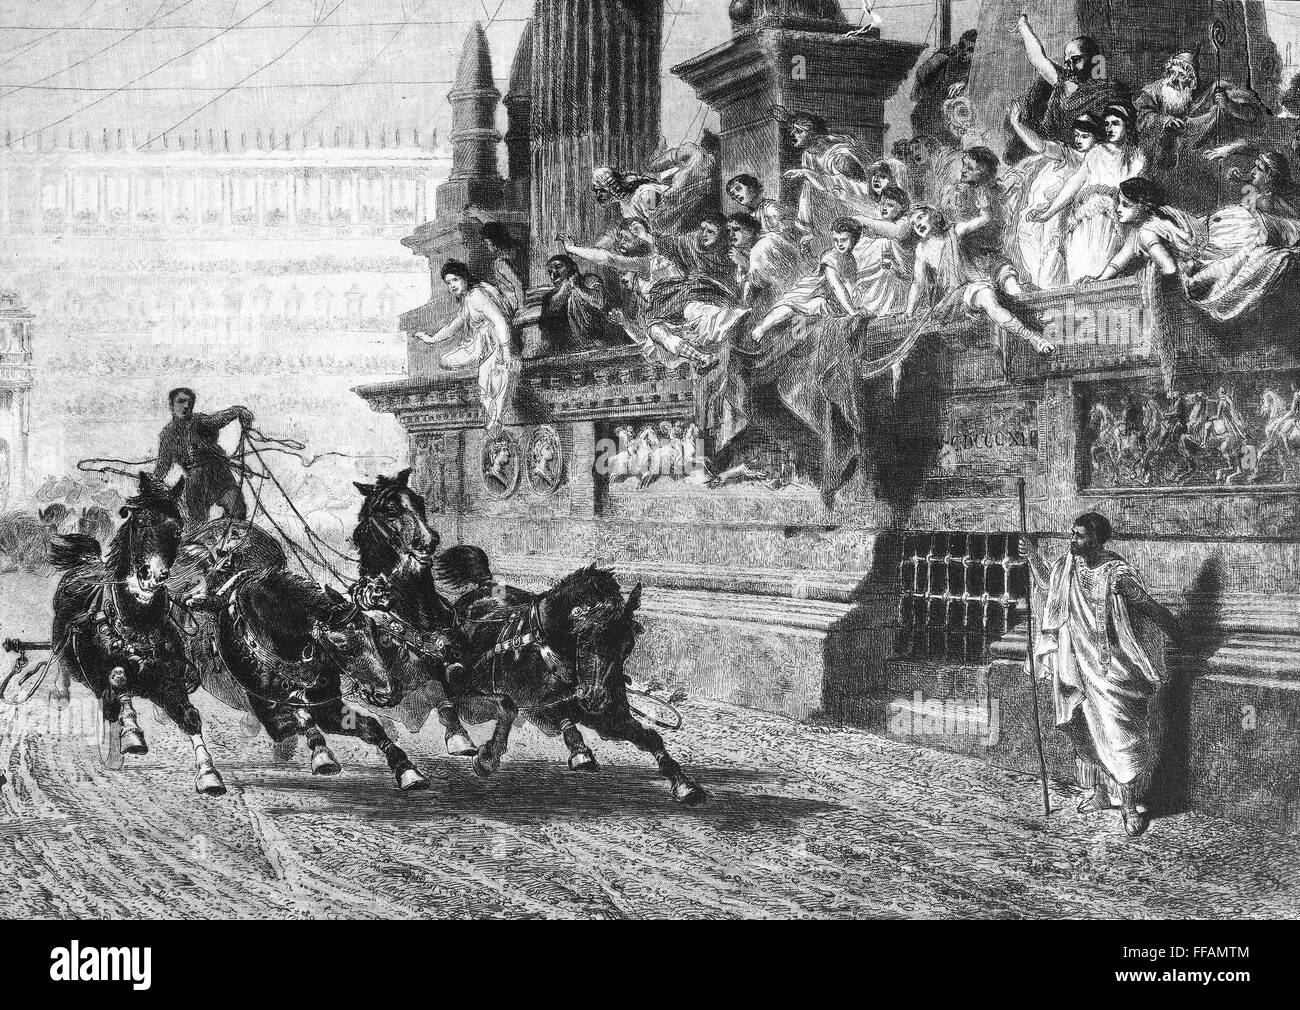 ANCIENT ROME: CHARIOT RACE. /nChariot race in the Circus Maximus. Line engraving, 19th century, after a painting by Alexander von Wagner (1838-1919). Stock Photo